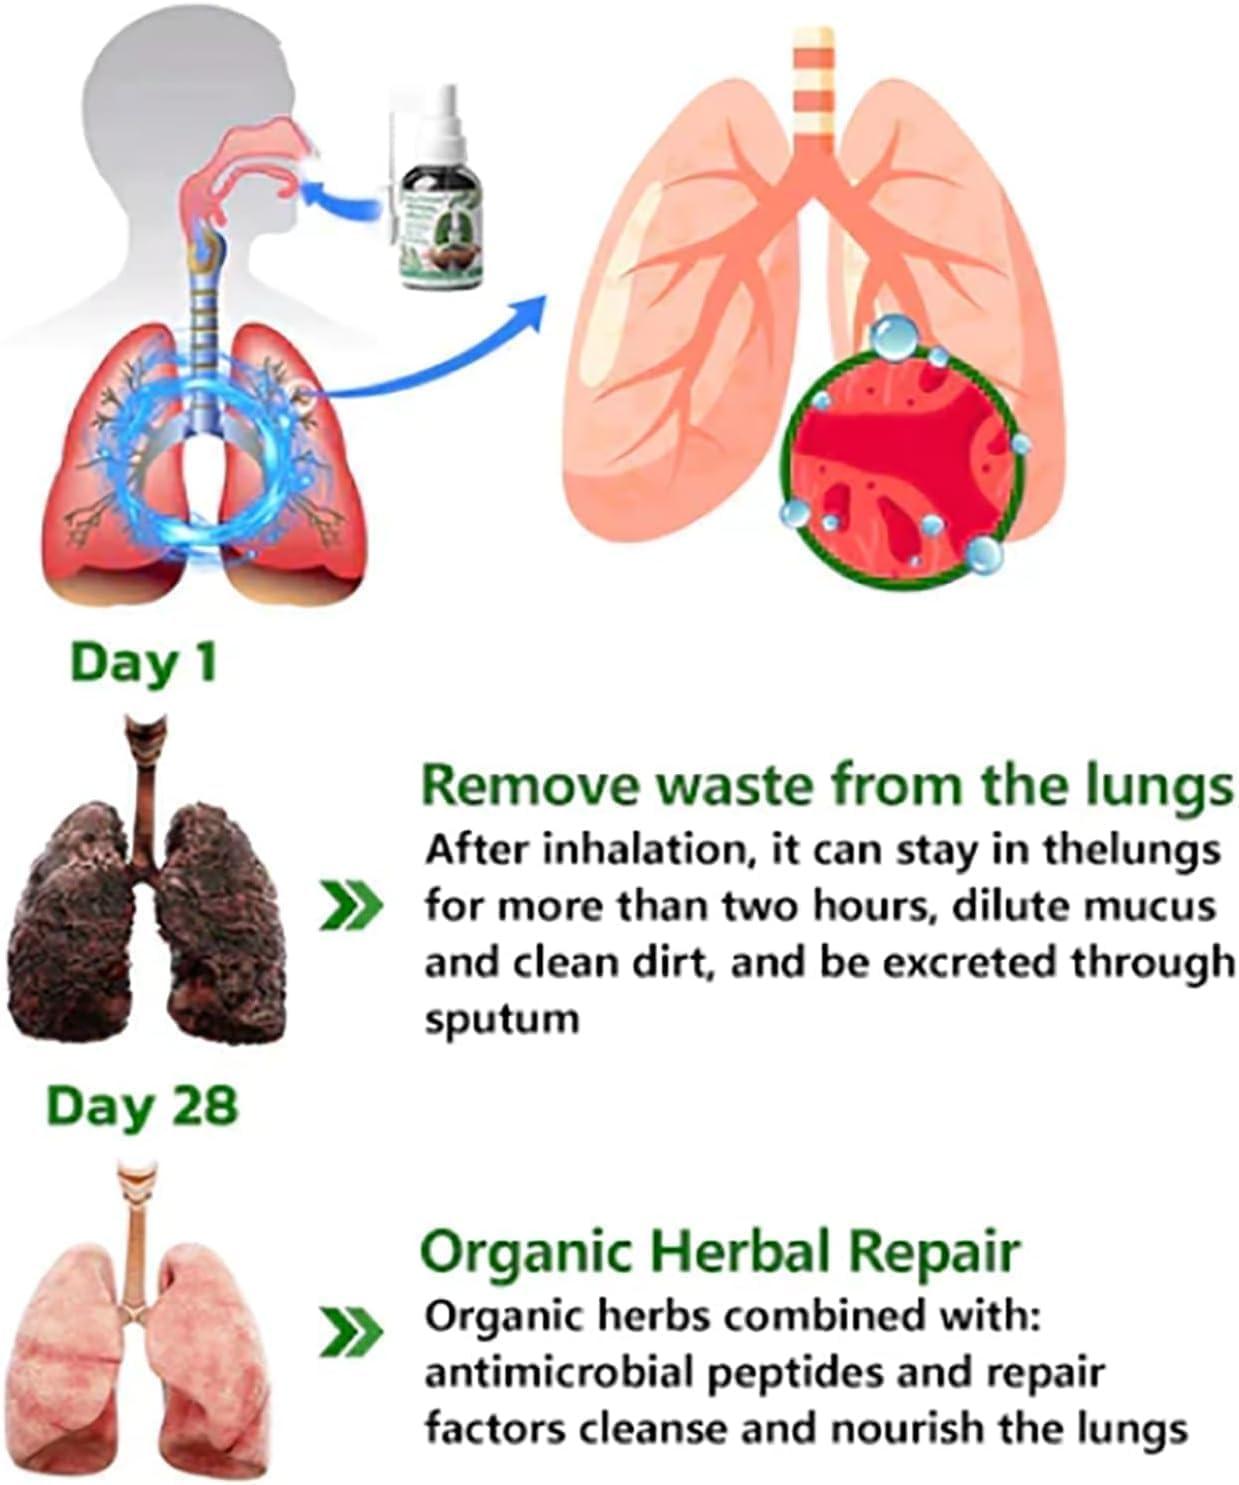 Respinature Herbal Lung Cleanse Mist-Powerful Lung Support Cleanse &  Breathe 30 Ml Respinature Herbal Spray 5 Natural Plant Extracts 4 Weeks  Powerful Lung Support & Cleanse & Respiratory (1pc)